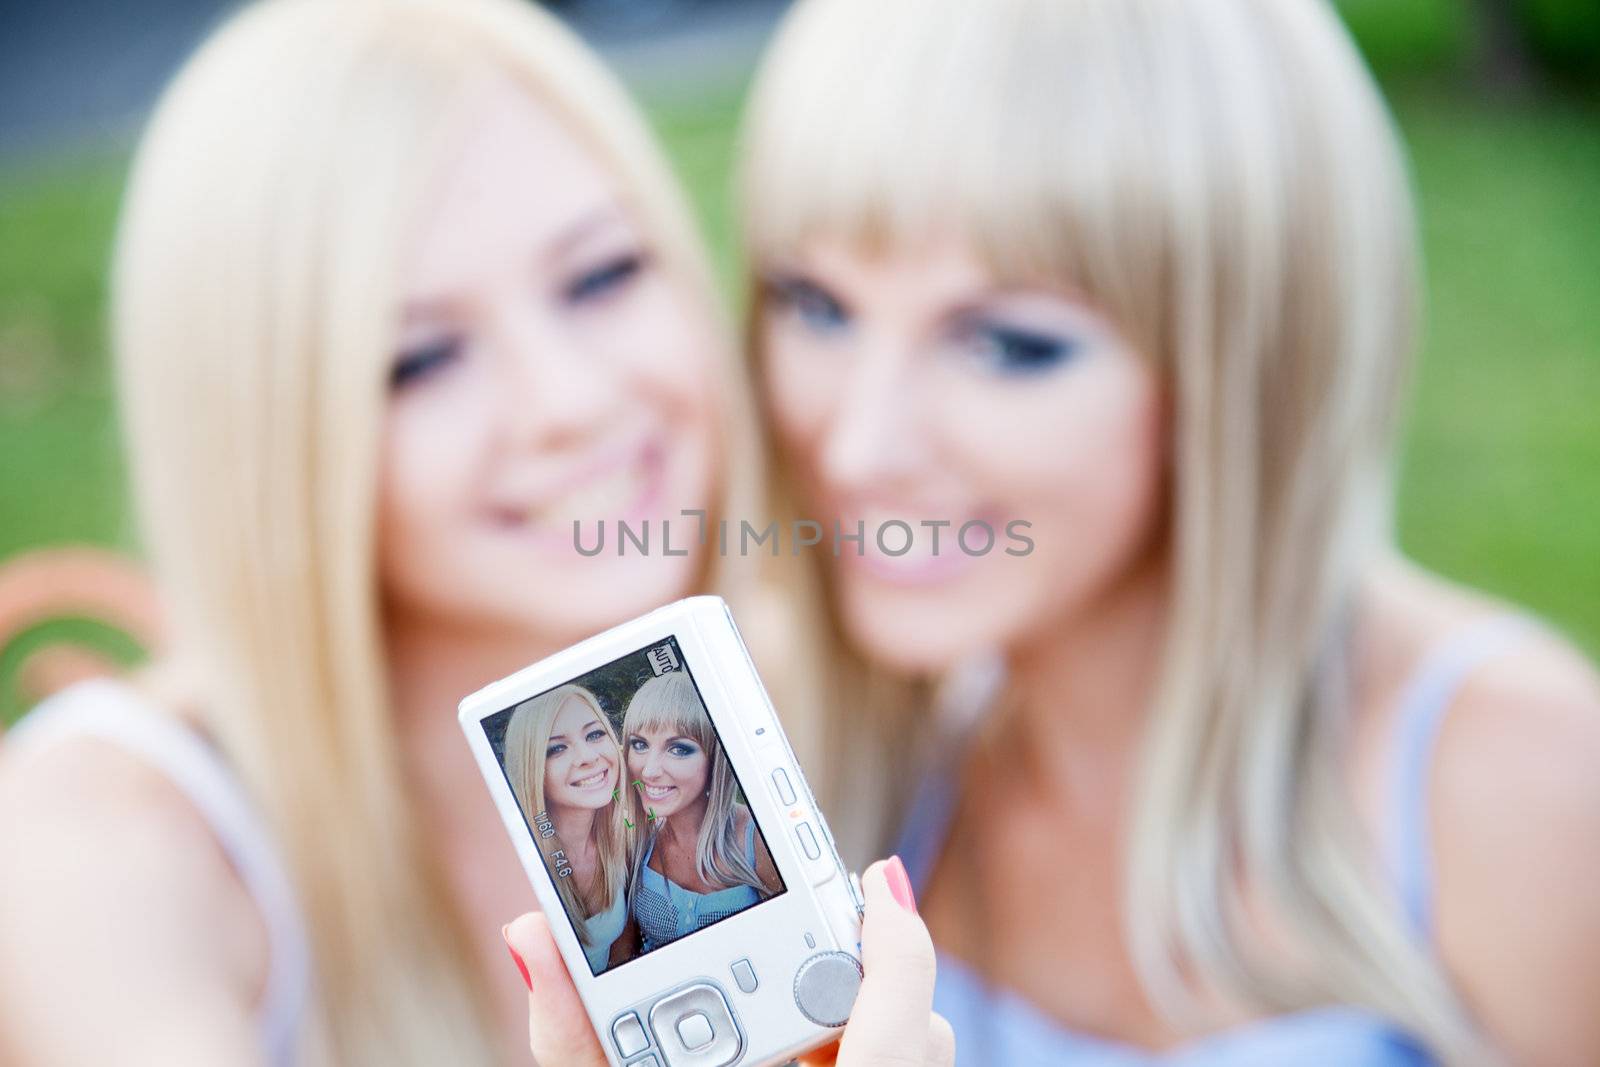 Two beautiful young girl friends with a digital photo camera